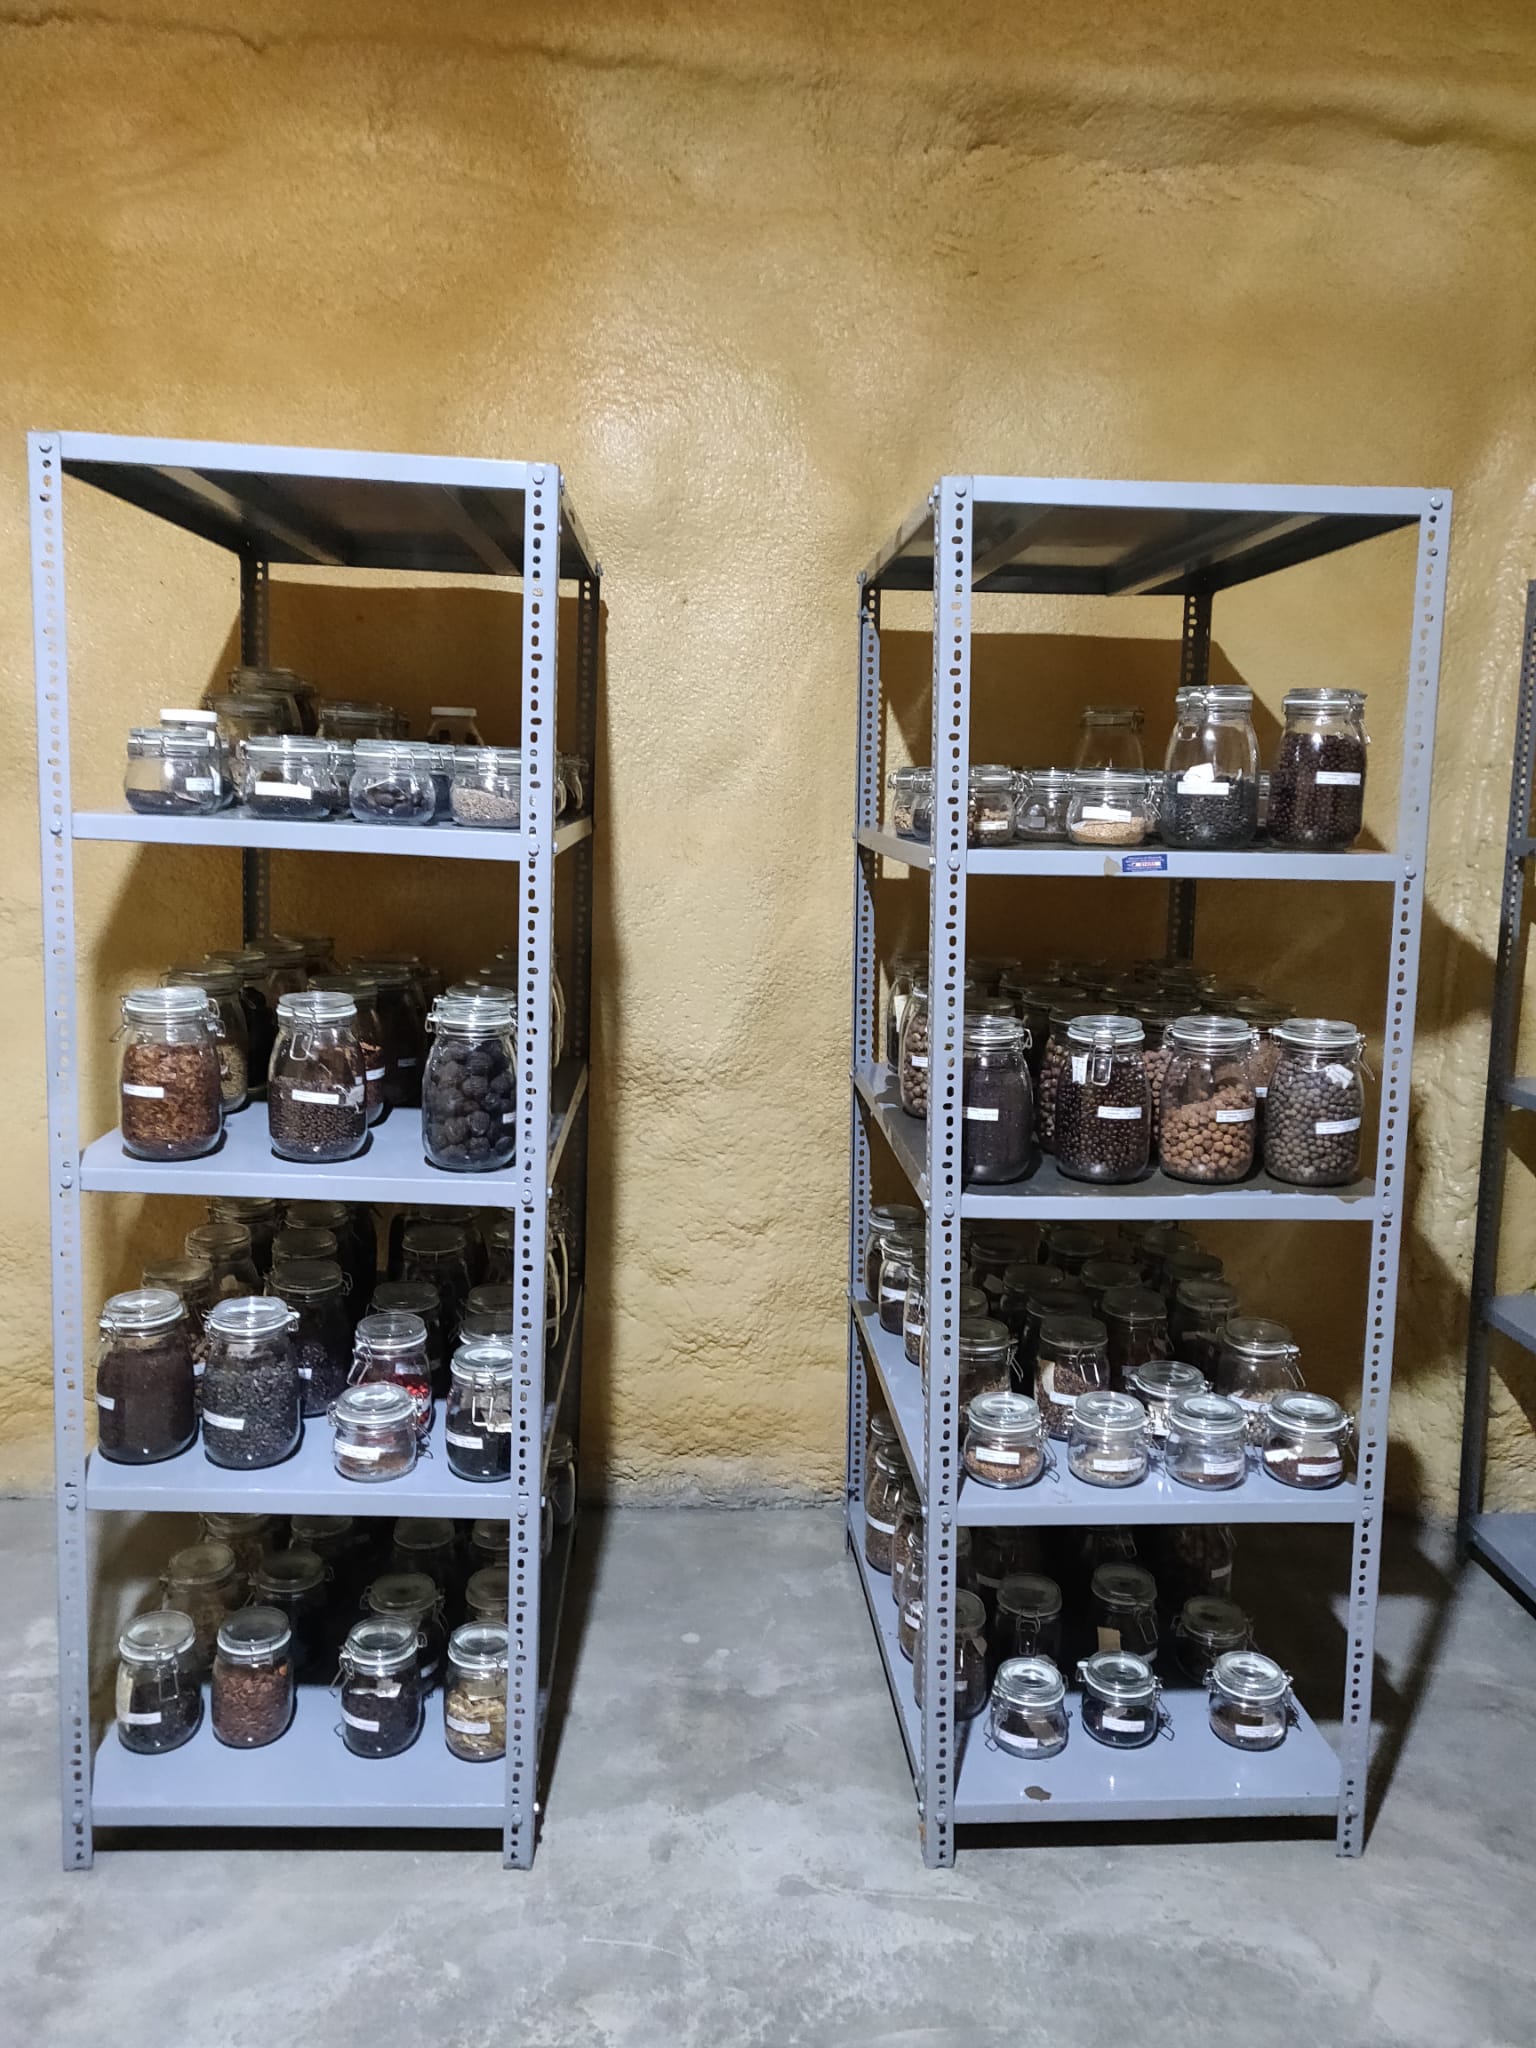 Many rows of jars full of various seeds sit on shelving